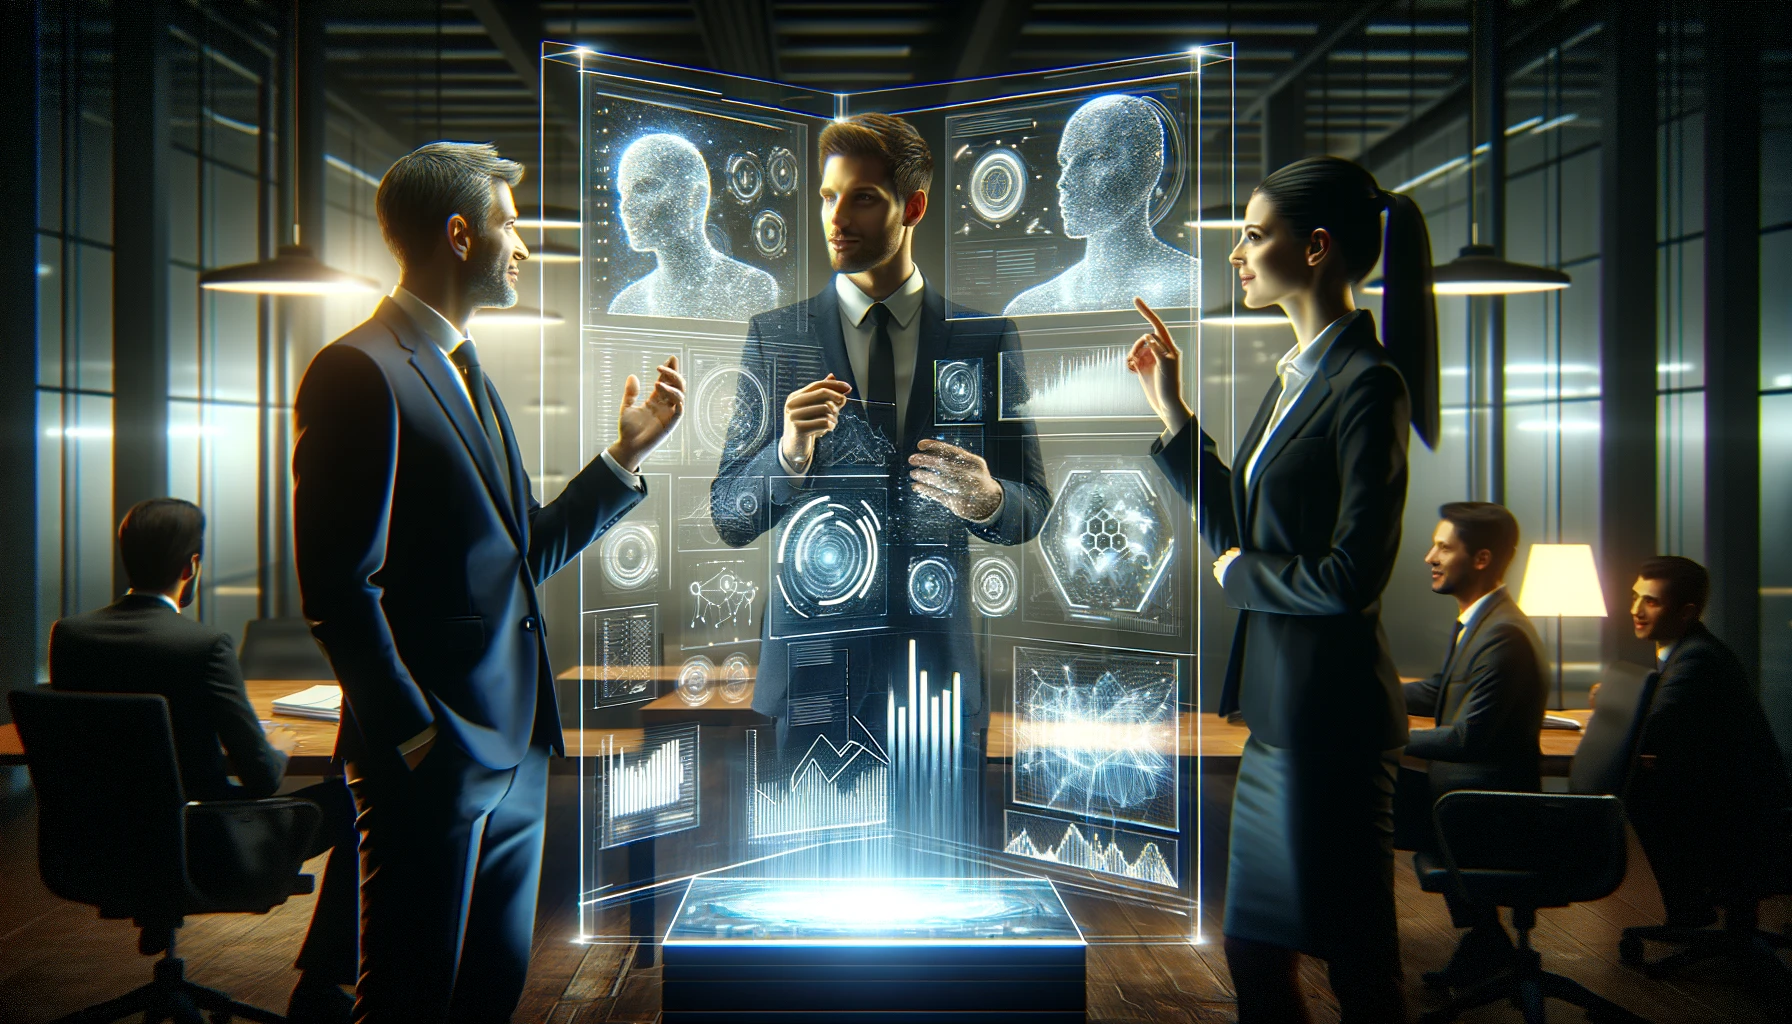 The digital painting features three business professionals in front of a futuristic digital display showing complex data analytics. This scene is set in a modern, dimly lit office environment, capturing a strategic discussion enhanced by AI-powered analytics in a sleek and cinematic style.